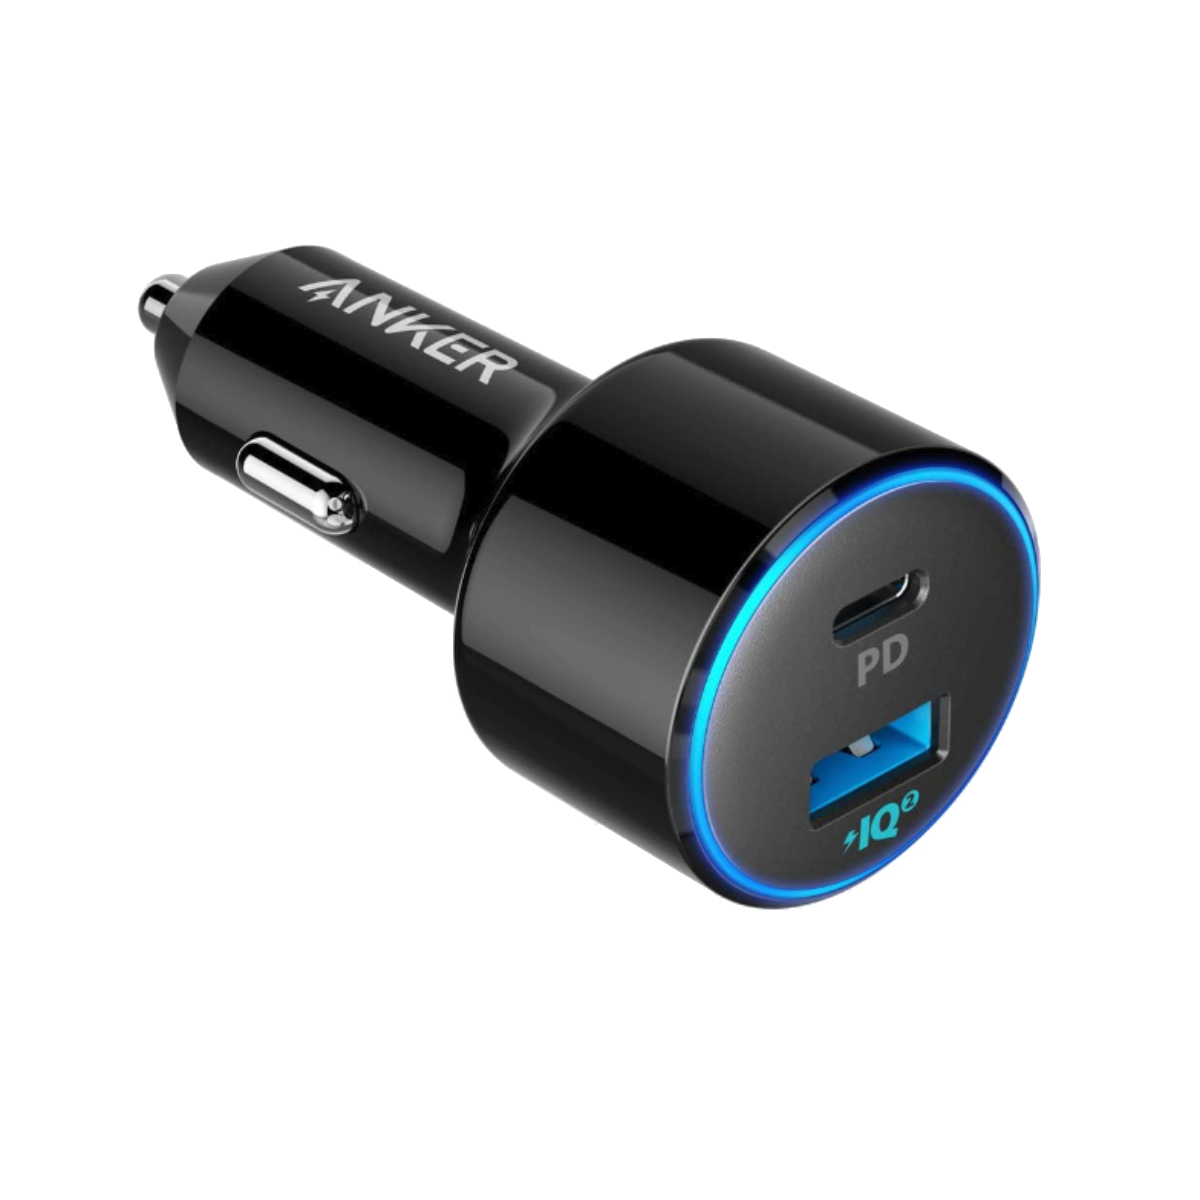 An Anker PowerDrive Speed+ 2 car charger